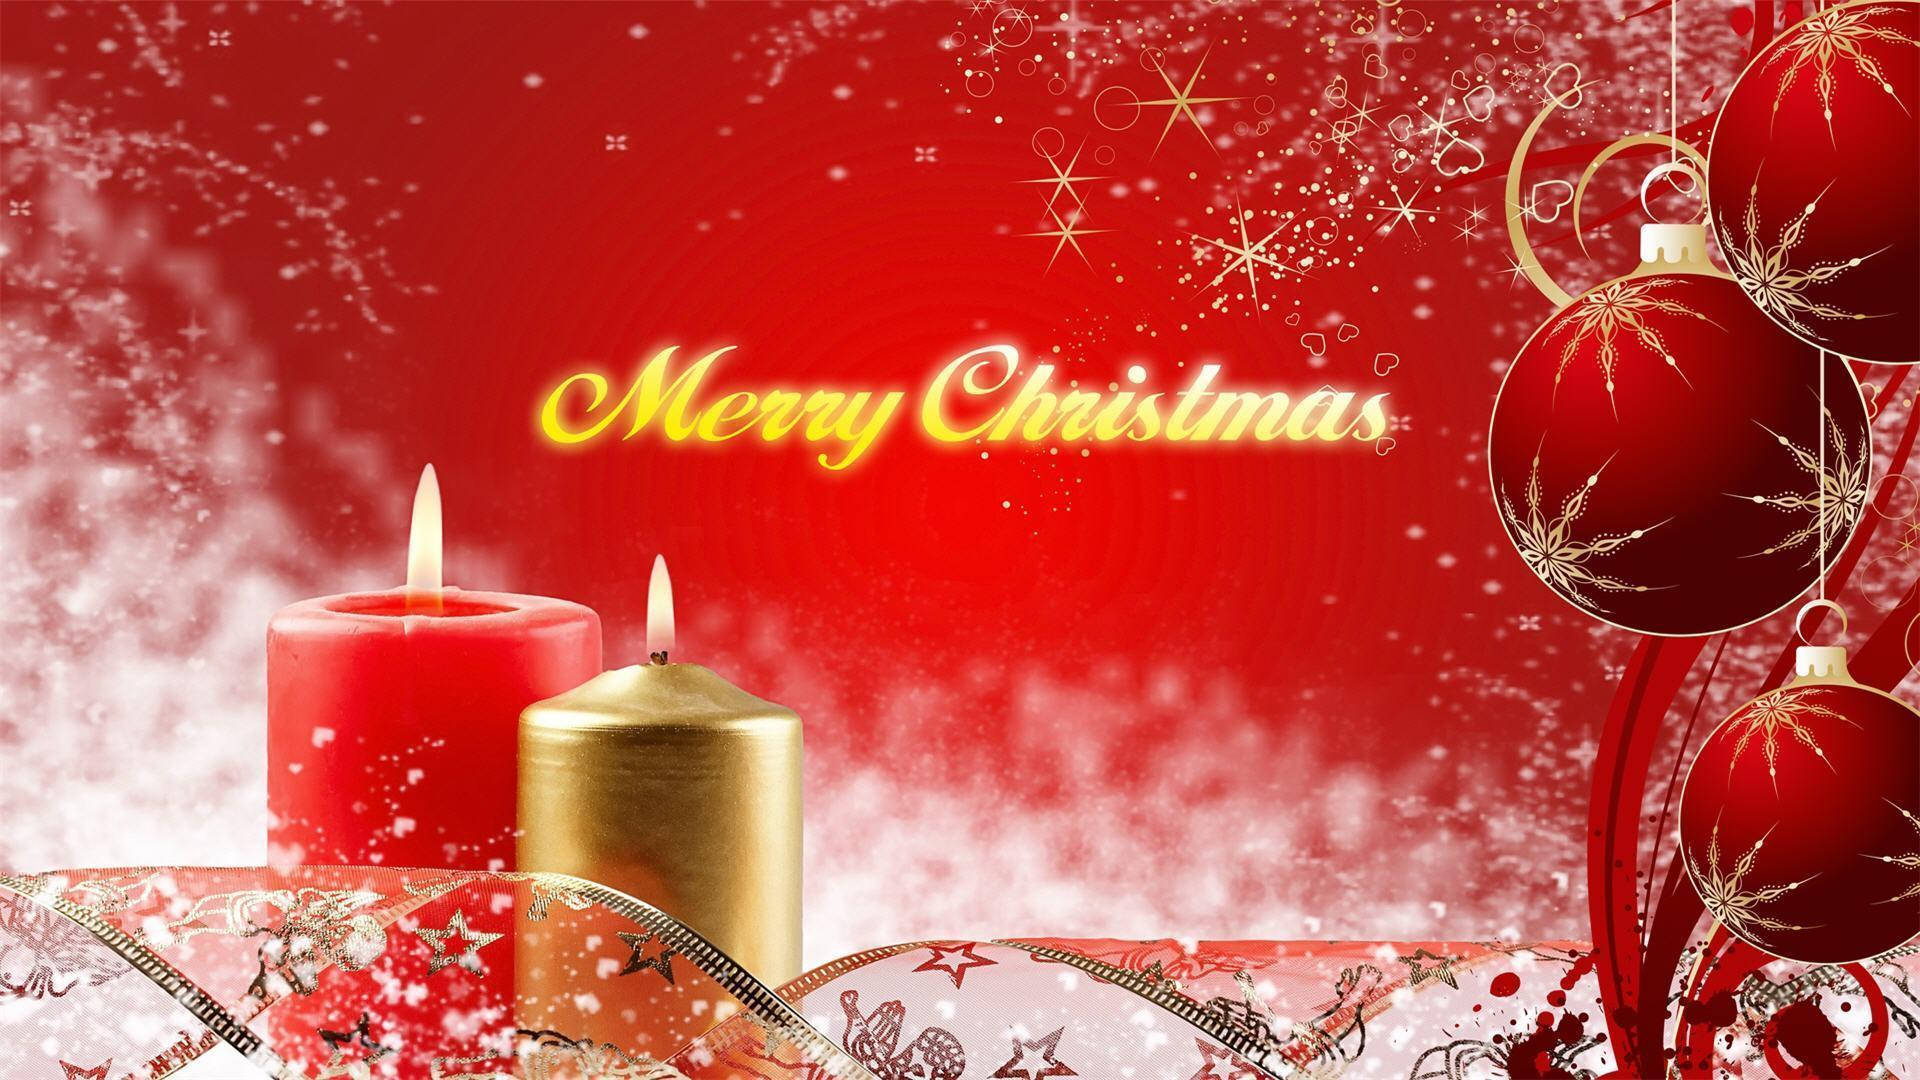 Pretty Christmas Wallpaper In Red Background